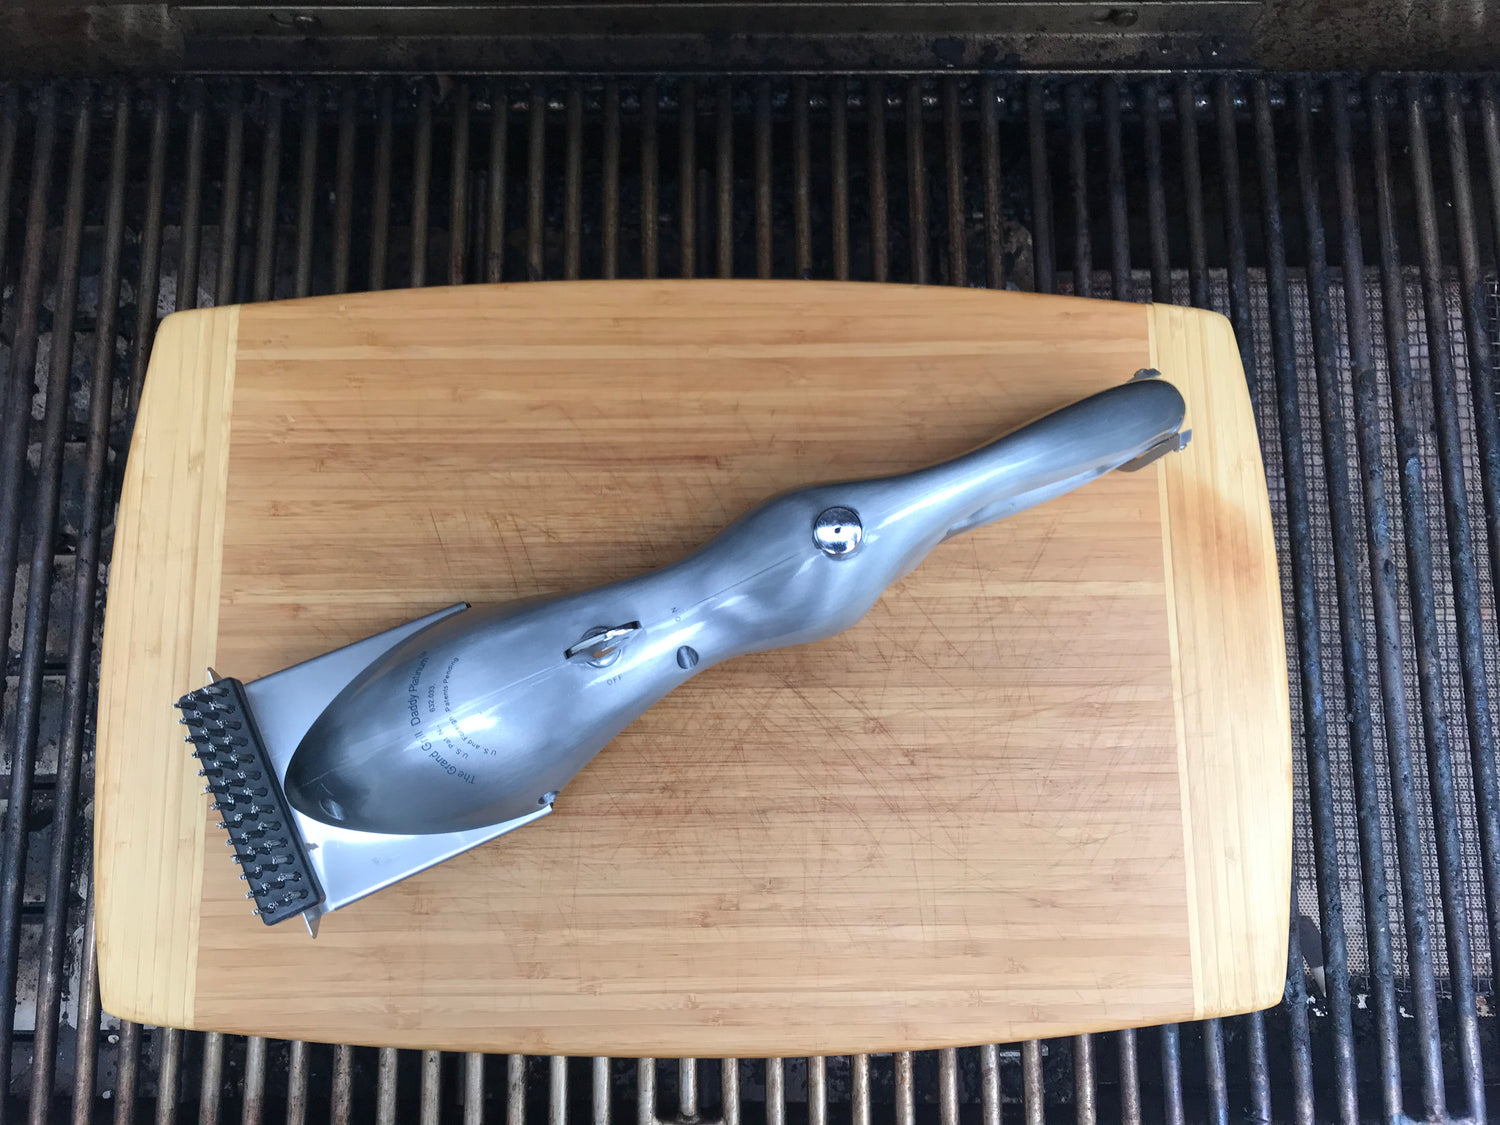 The Grill Daddy cleaning brush uses steam to melt away stuck-on food